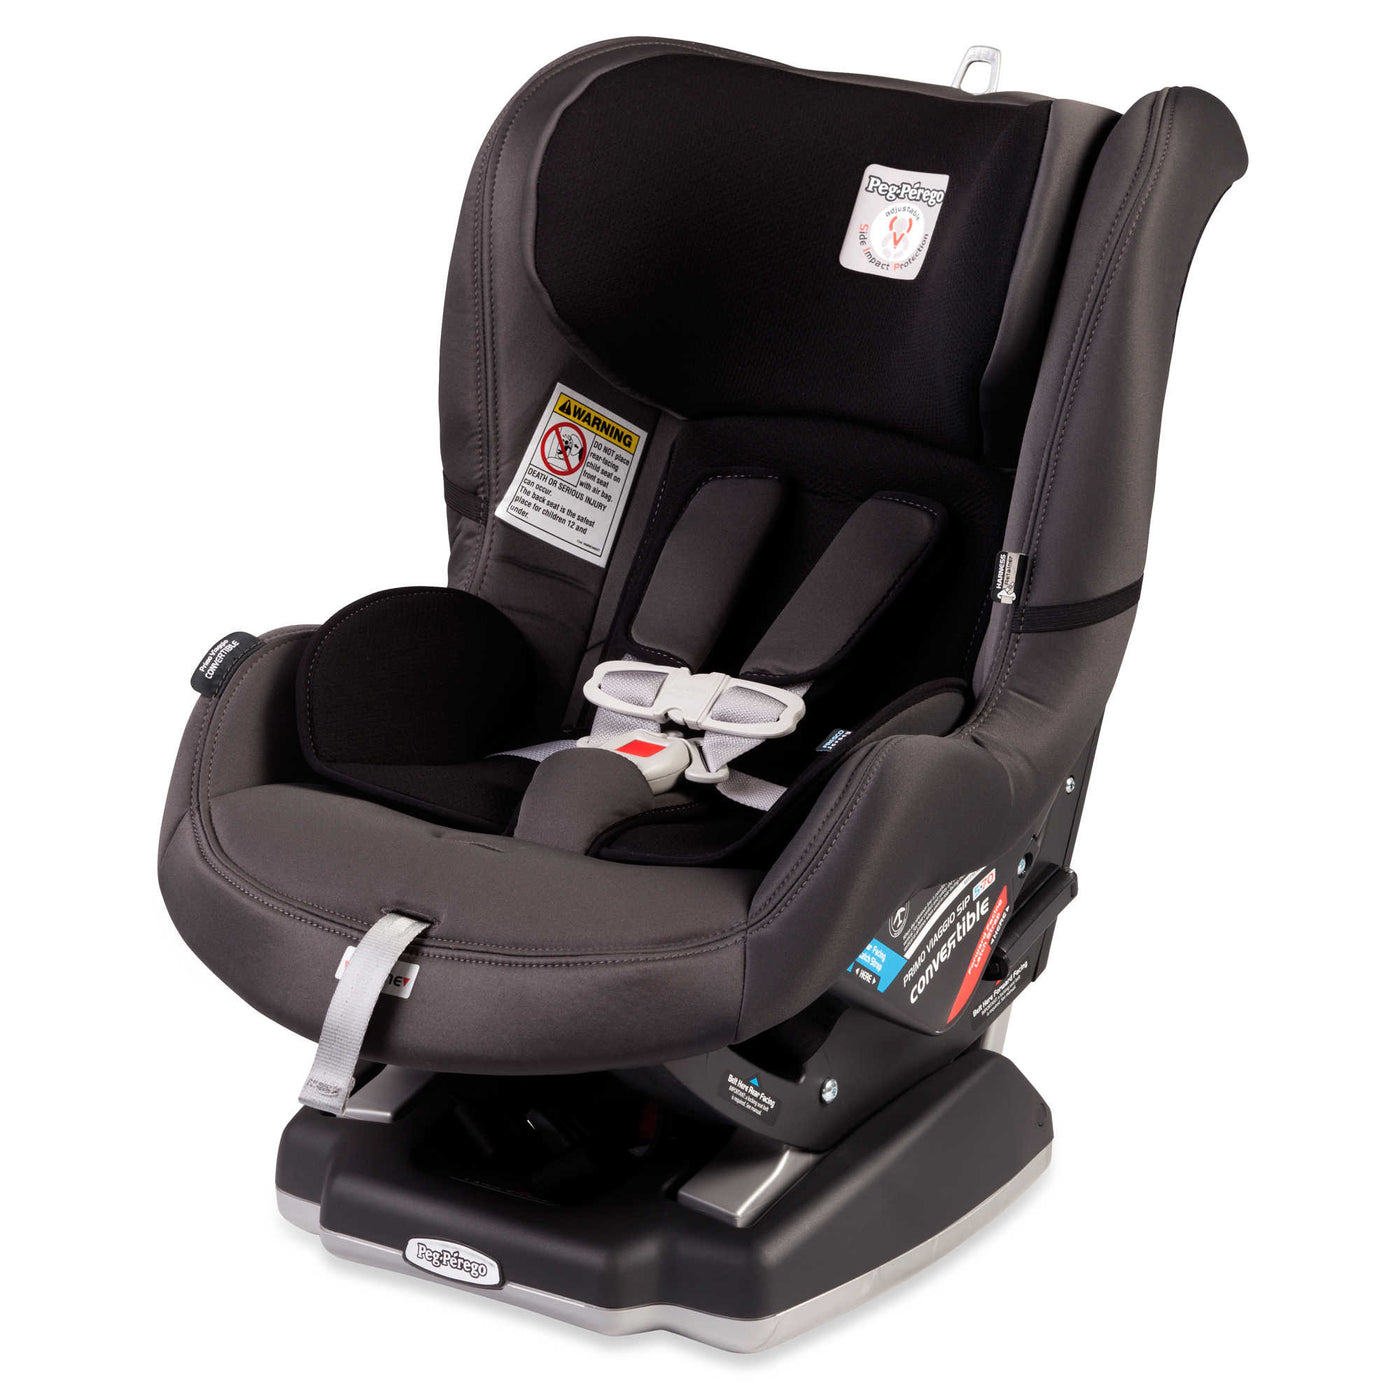 Safe in the Seat » Peg Perego Viaggio Flex Booster Seat Review (US